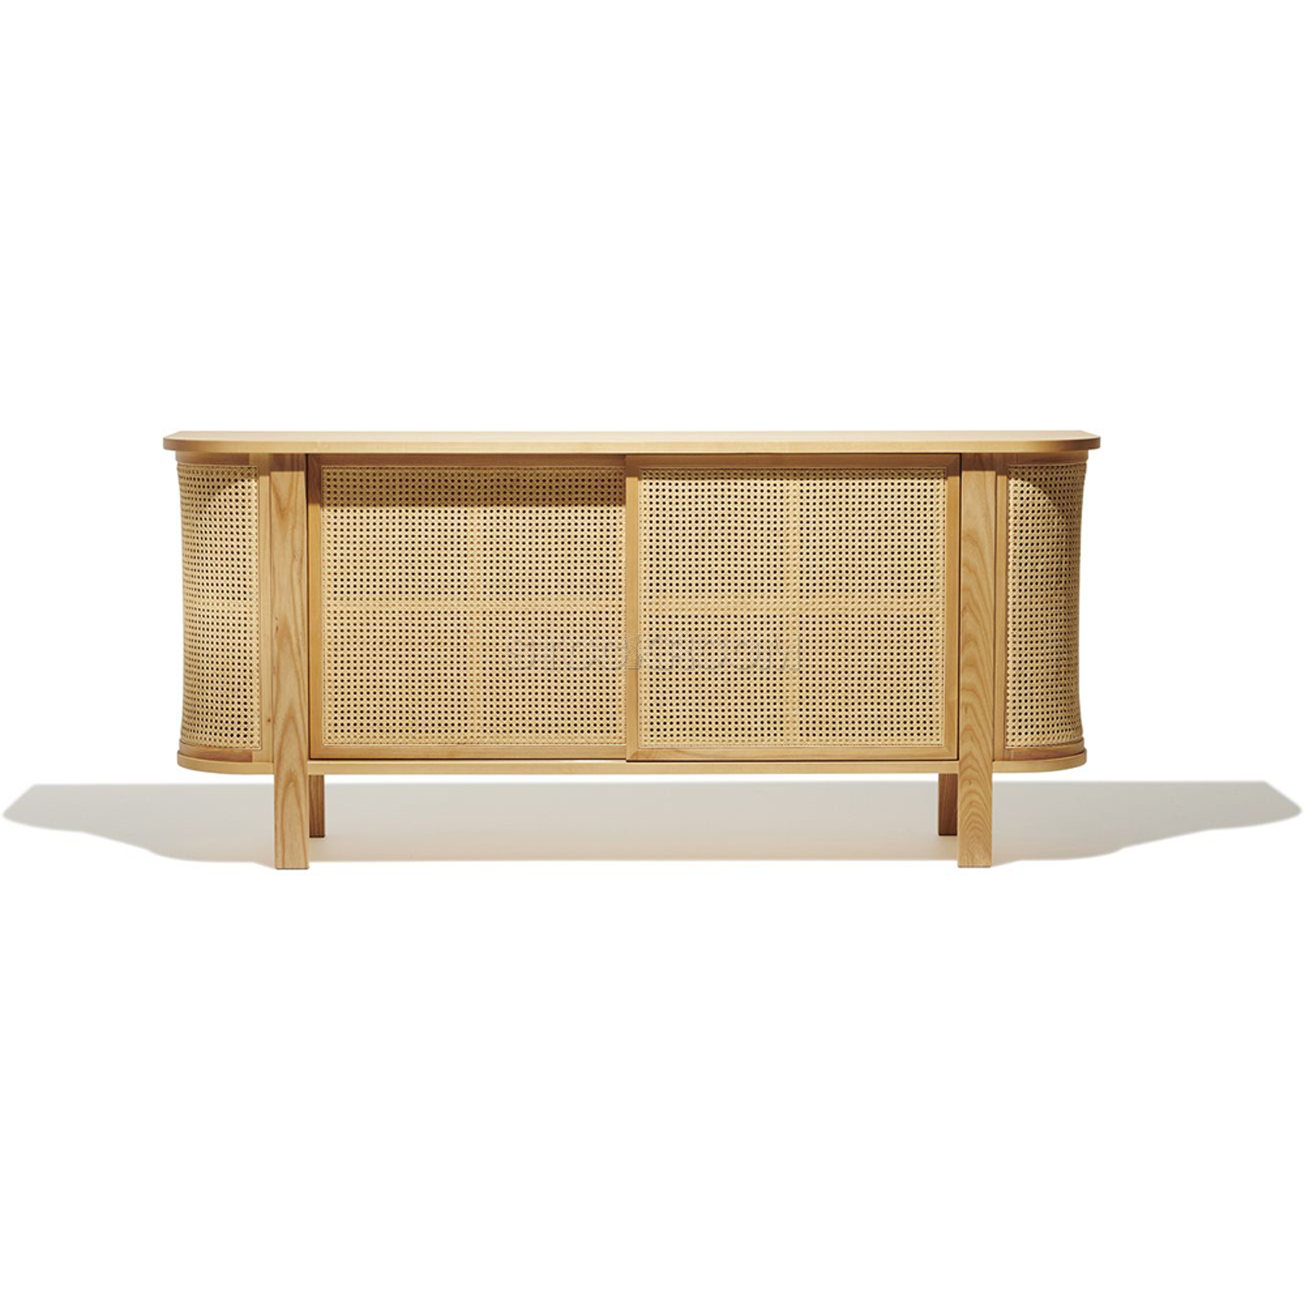 Chloe Contemporary Woven Cane Sideboard / Cabinet / Console